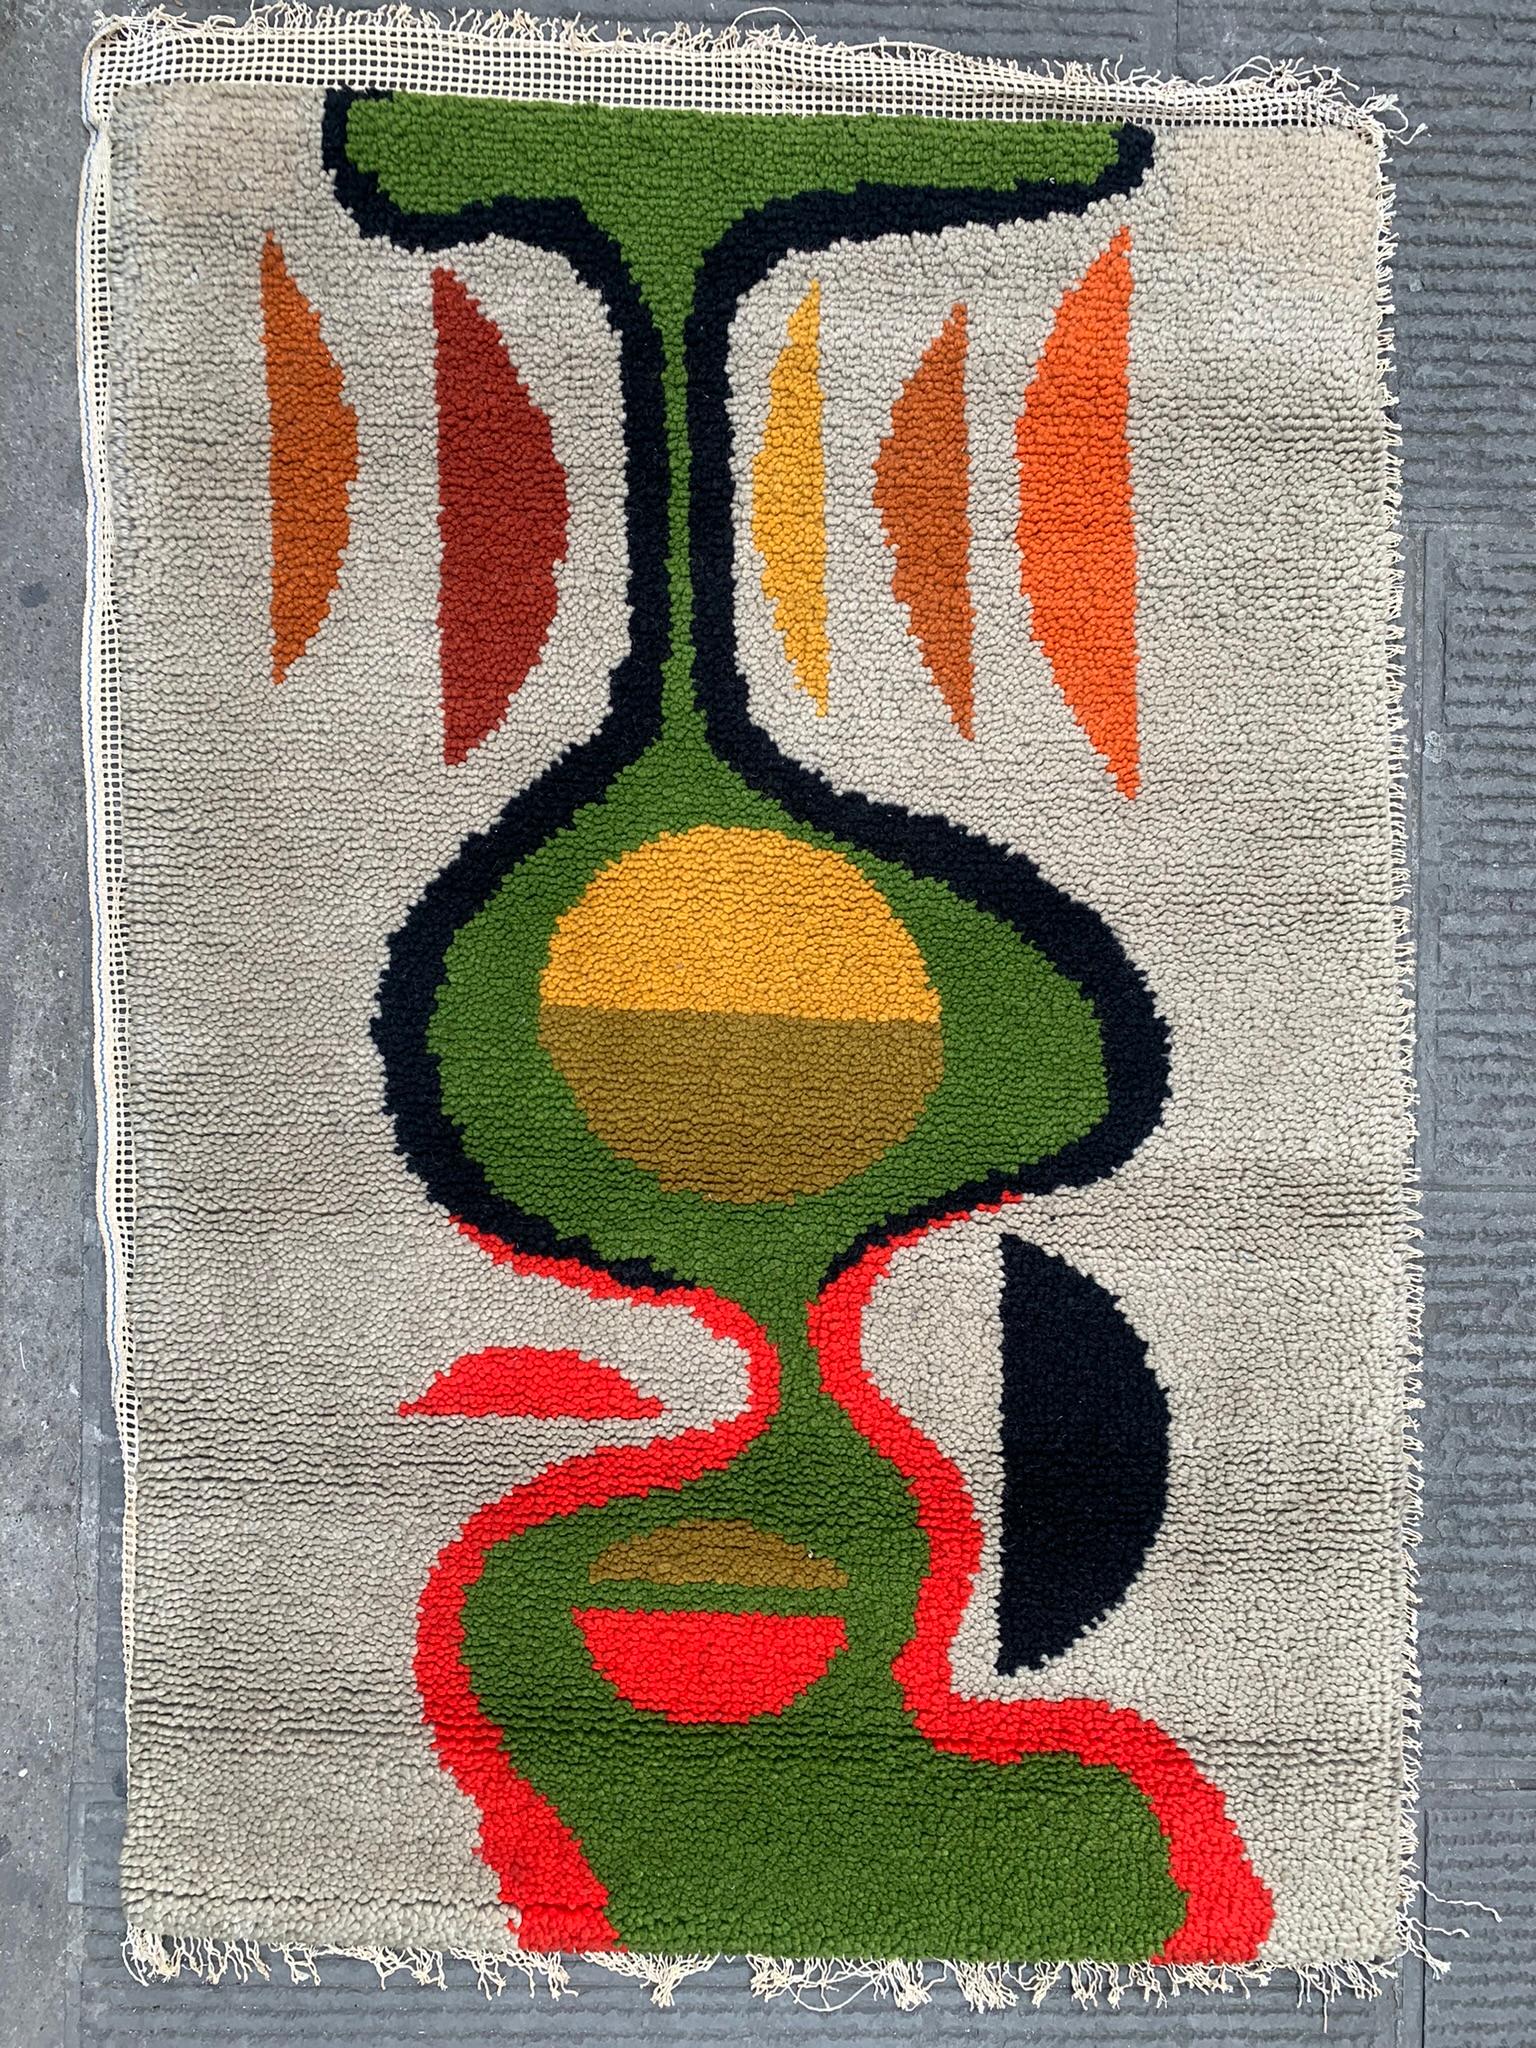 Carpet from the 1950s-60s.
Wool and cotton.
Bright midcentury style colors.
In good condition , needs only cleaning.

With Mid century style abstract painting motifs.
According to the story of the previous owner, the carpet was made by a craftsman